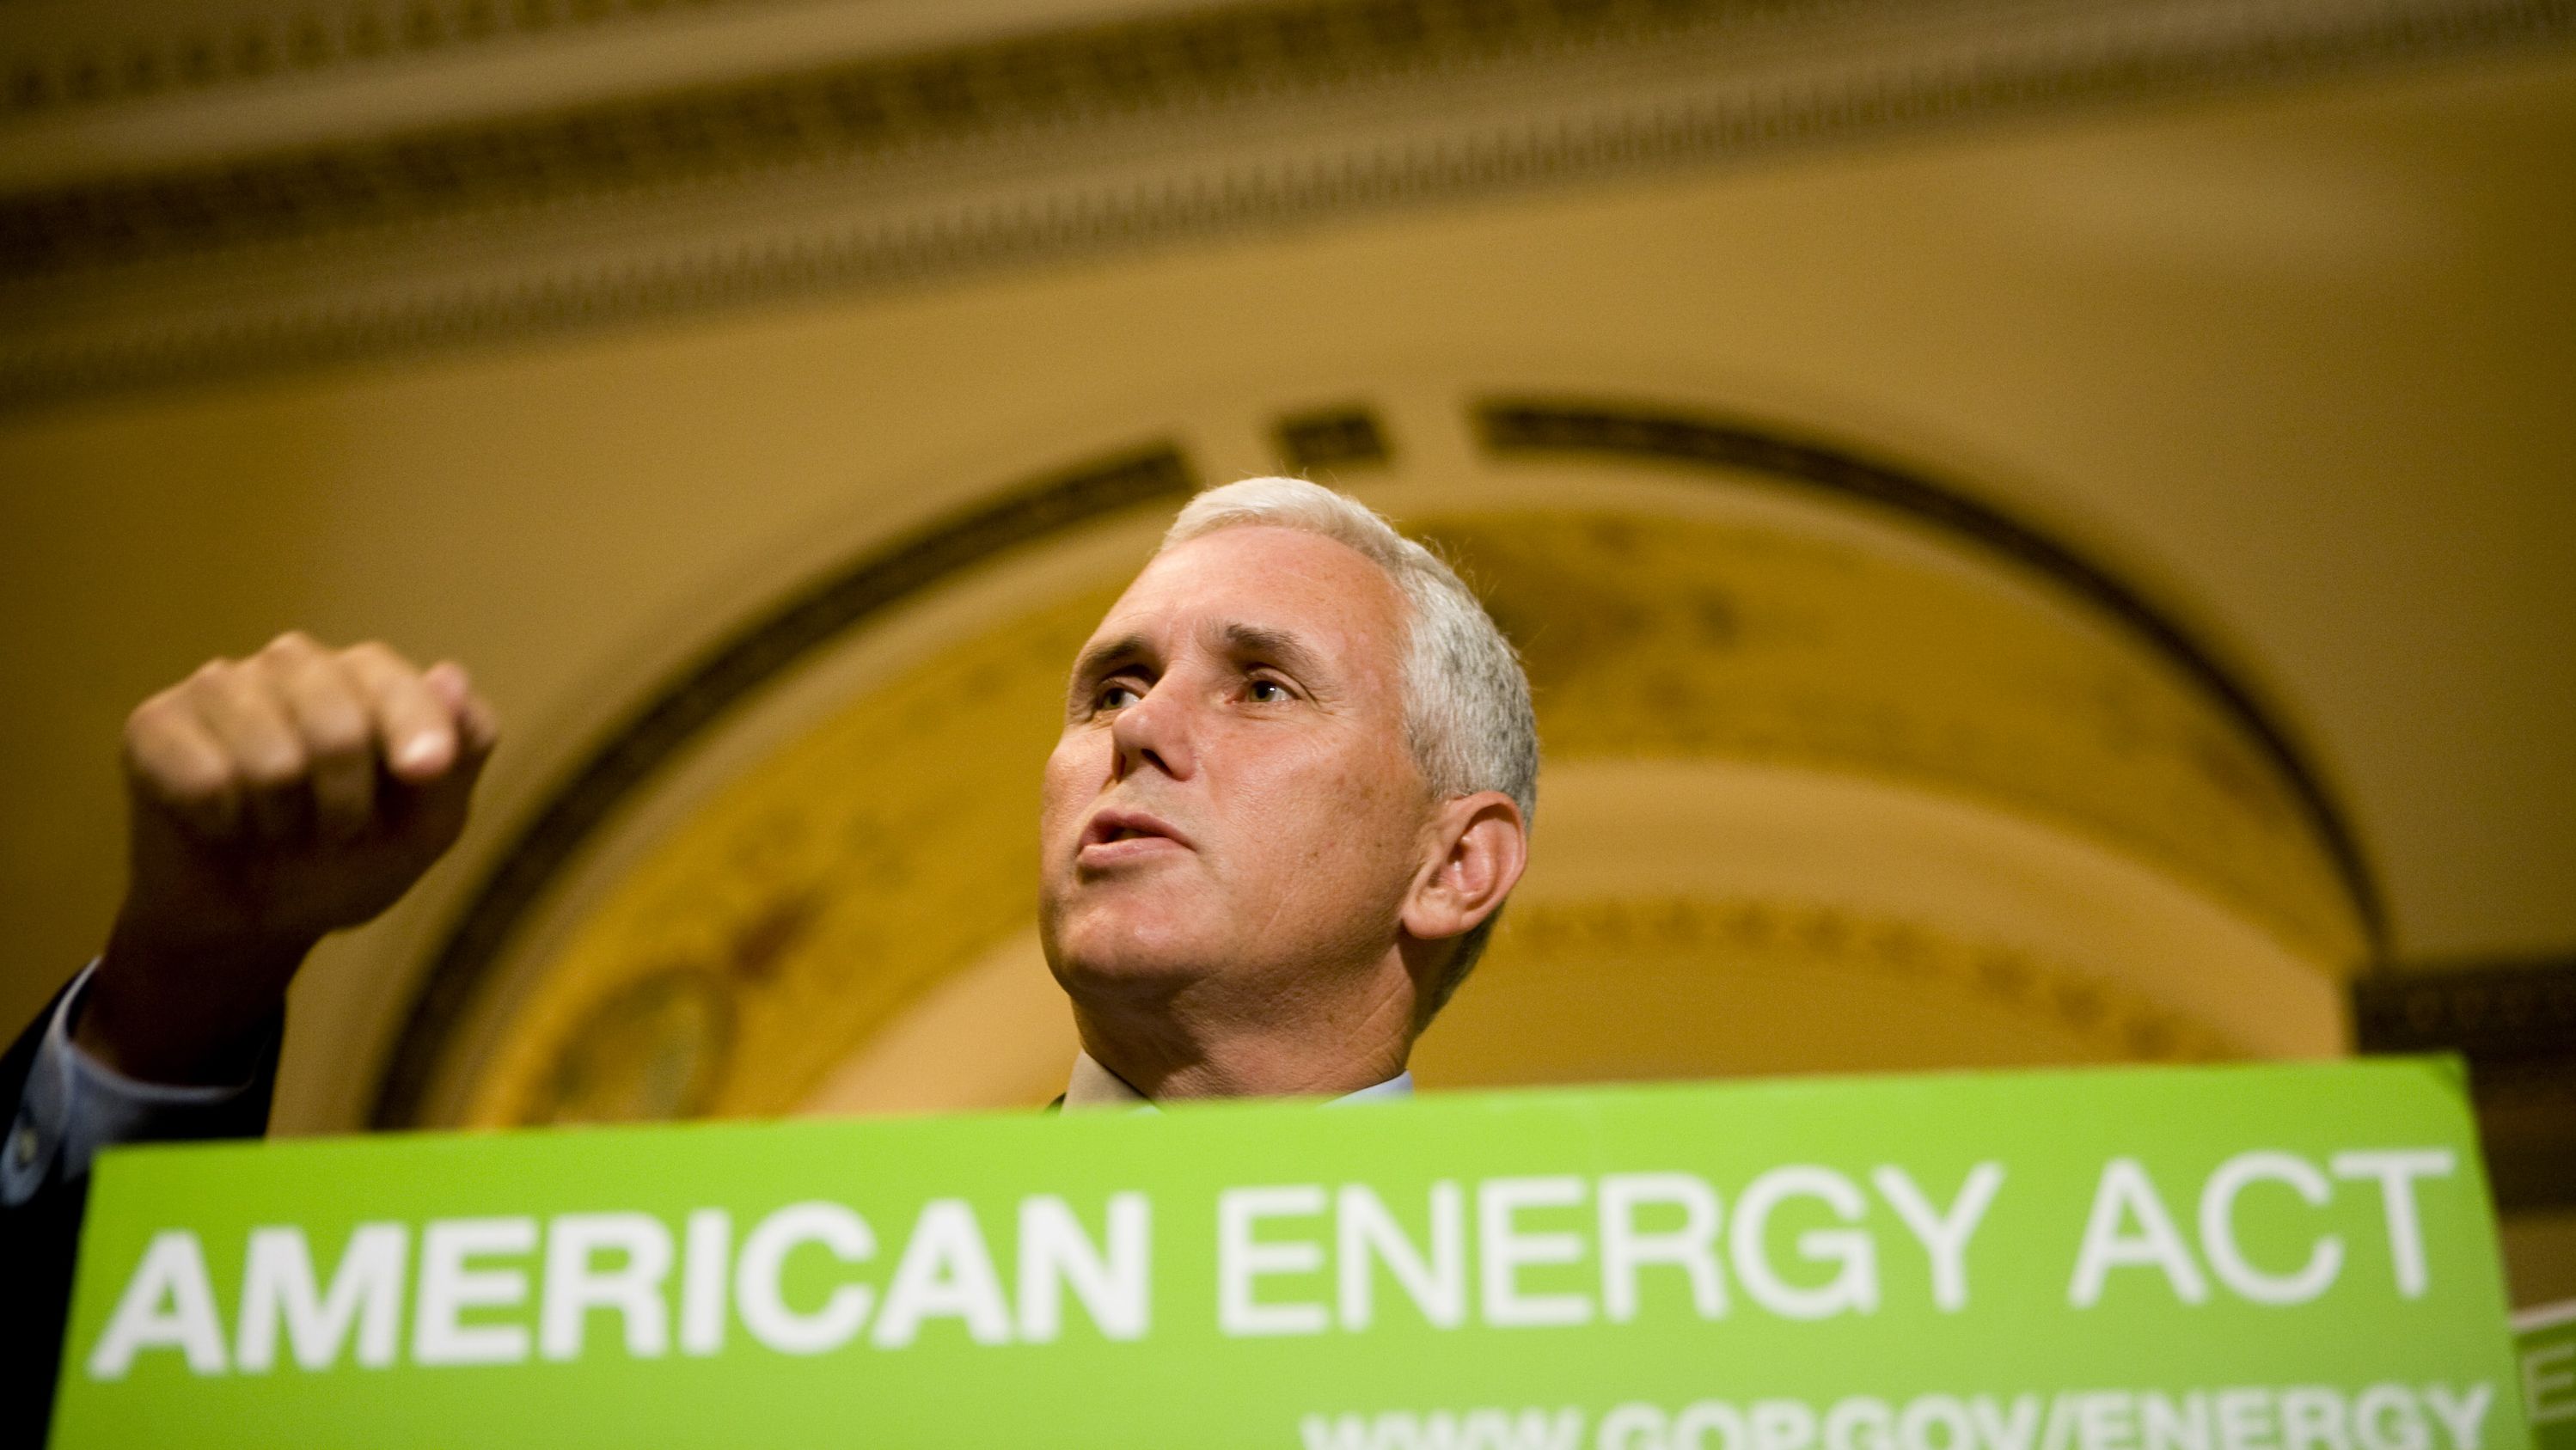 Pence speaks at a 2008 news conference in Washington, DC. Pence and other House Republicans were calling on House Speaker Nancy Pelosi to schedule a vote on energy legislation to help lower gasoline prices.